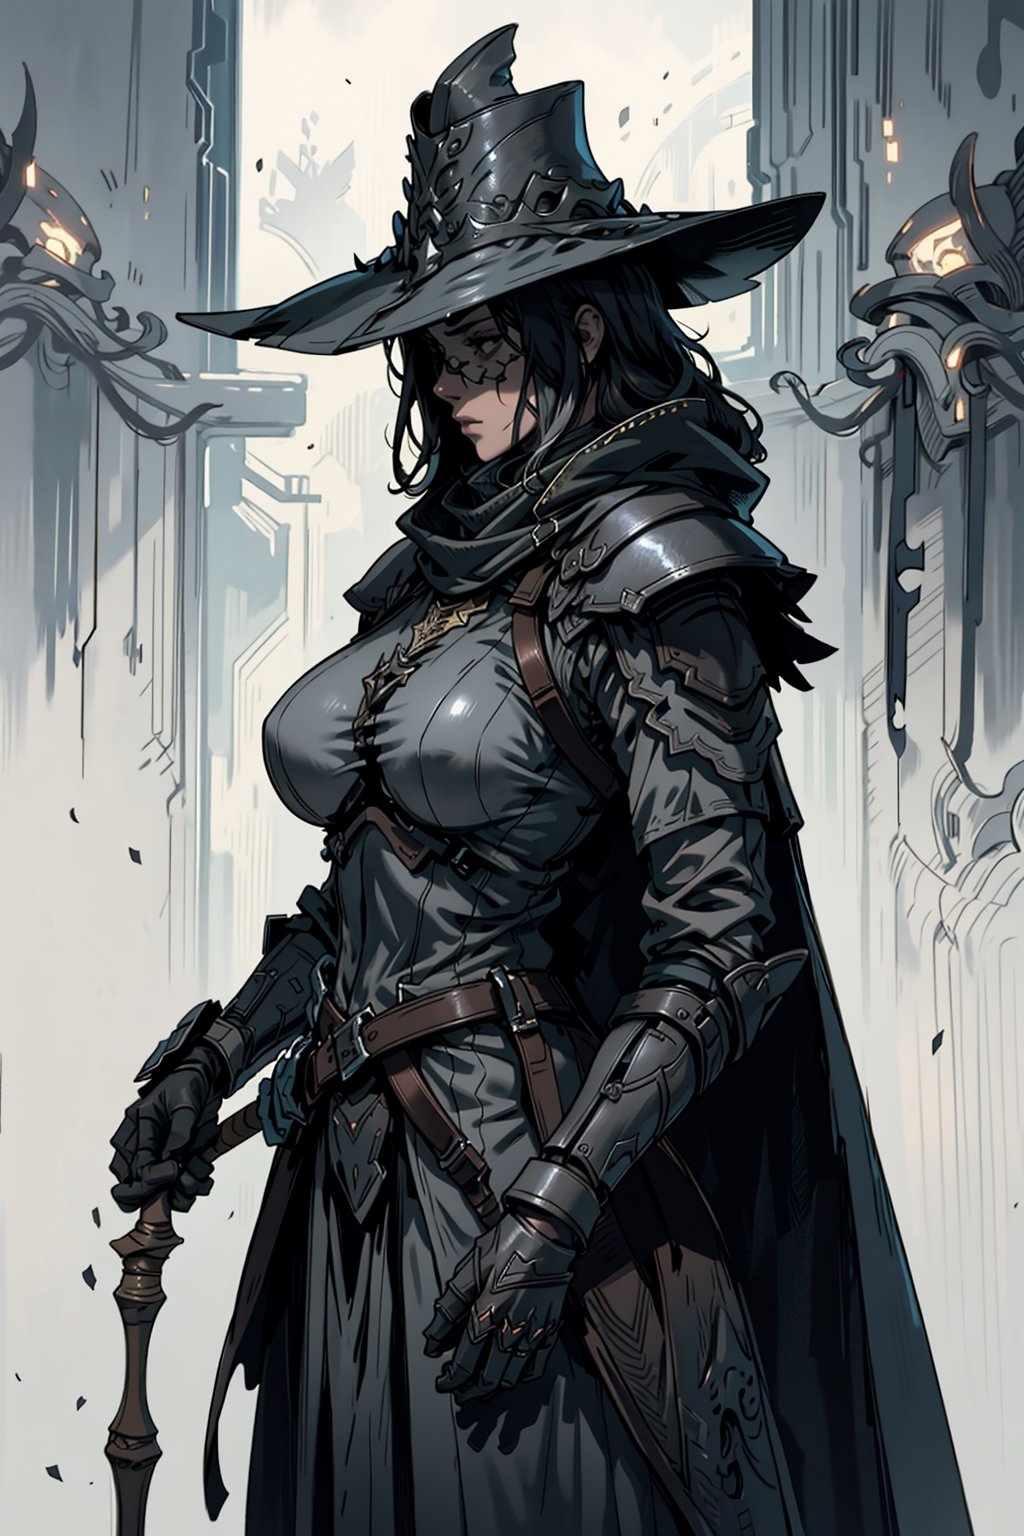 Masterpiece, best quality, solo, simple_background, viewed_from_side,1 girl, knight, large breasts hand holding an axe , dark grey body armor, wearing edg, dark armor, hat, (dynamic scene)